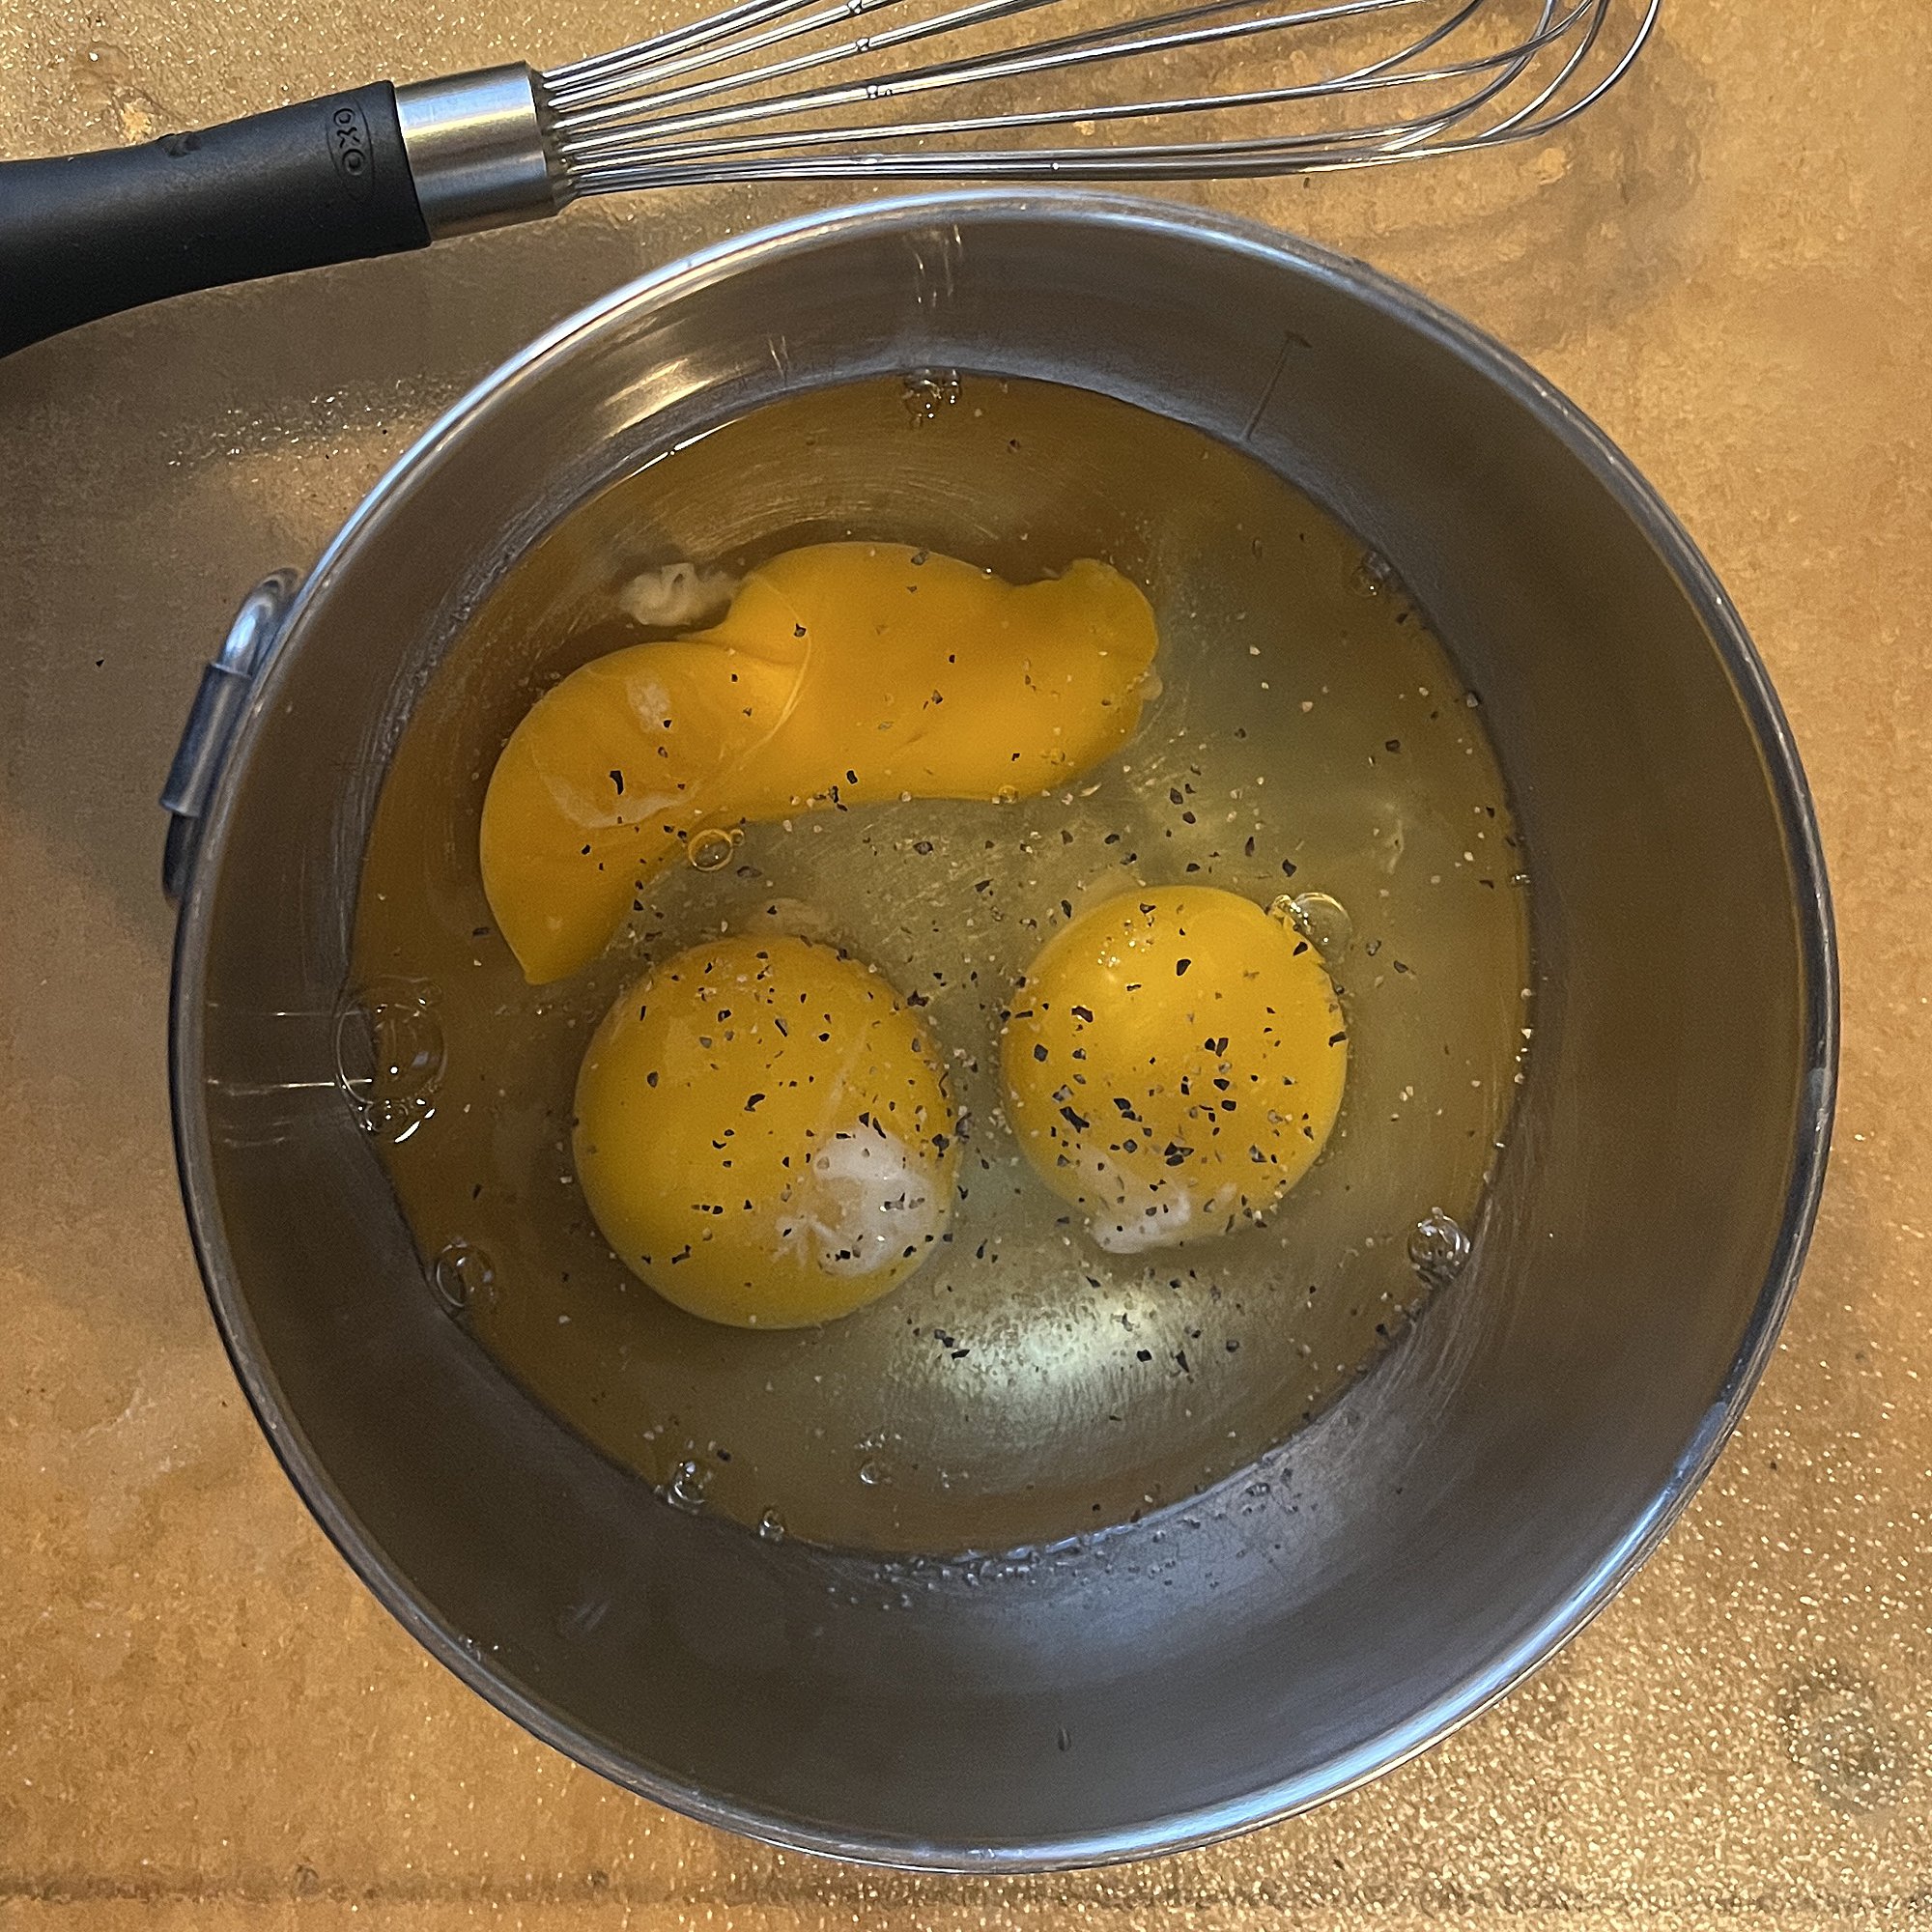 Break three eggs at a time into a bowl.